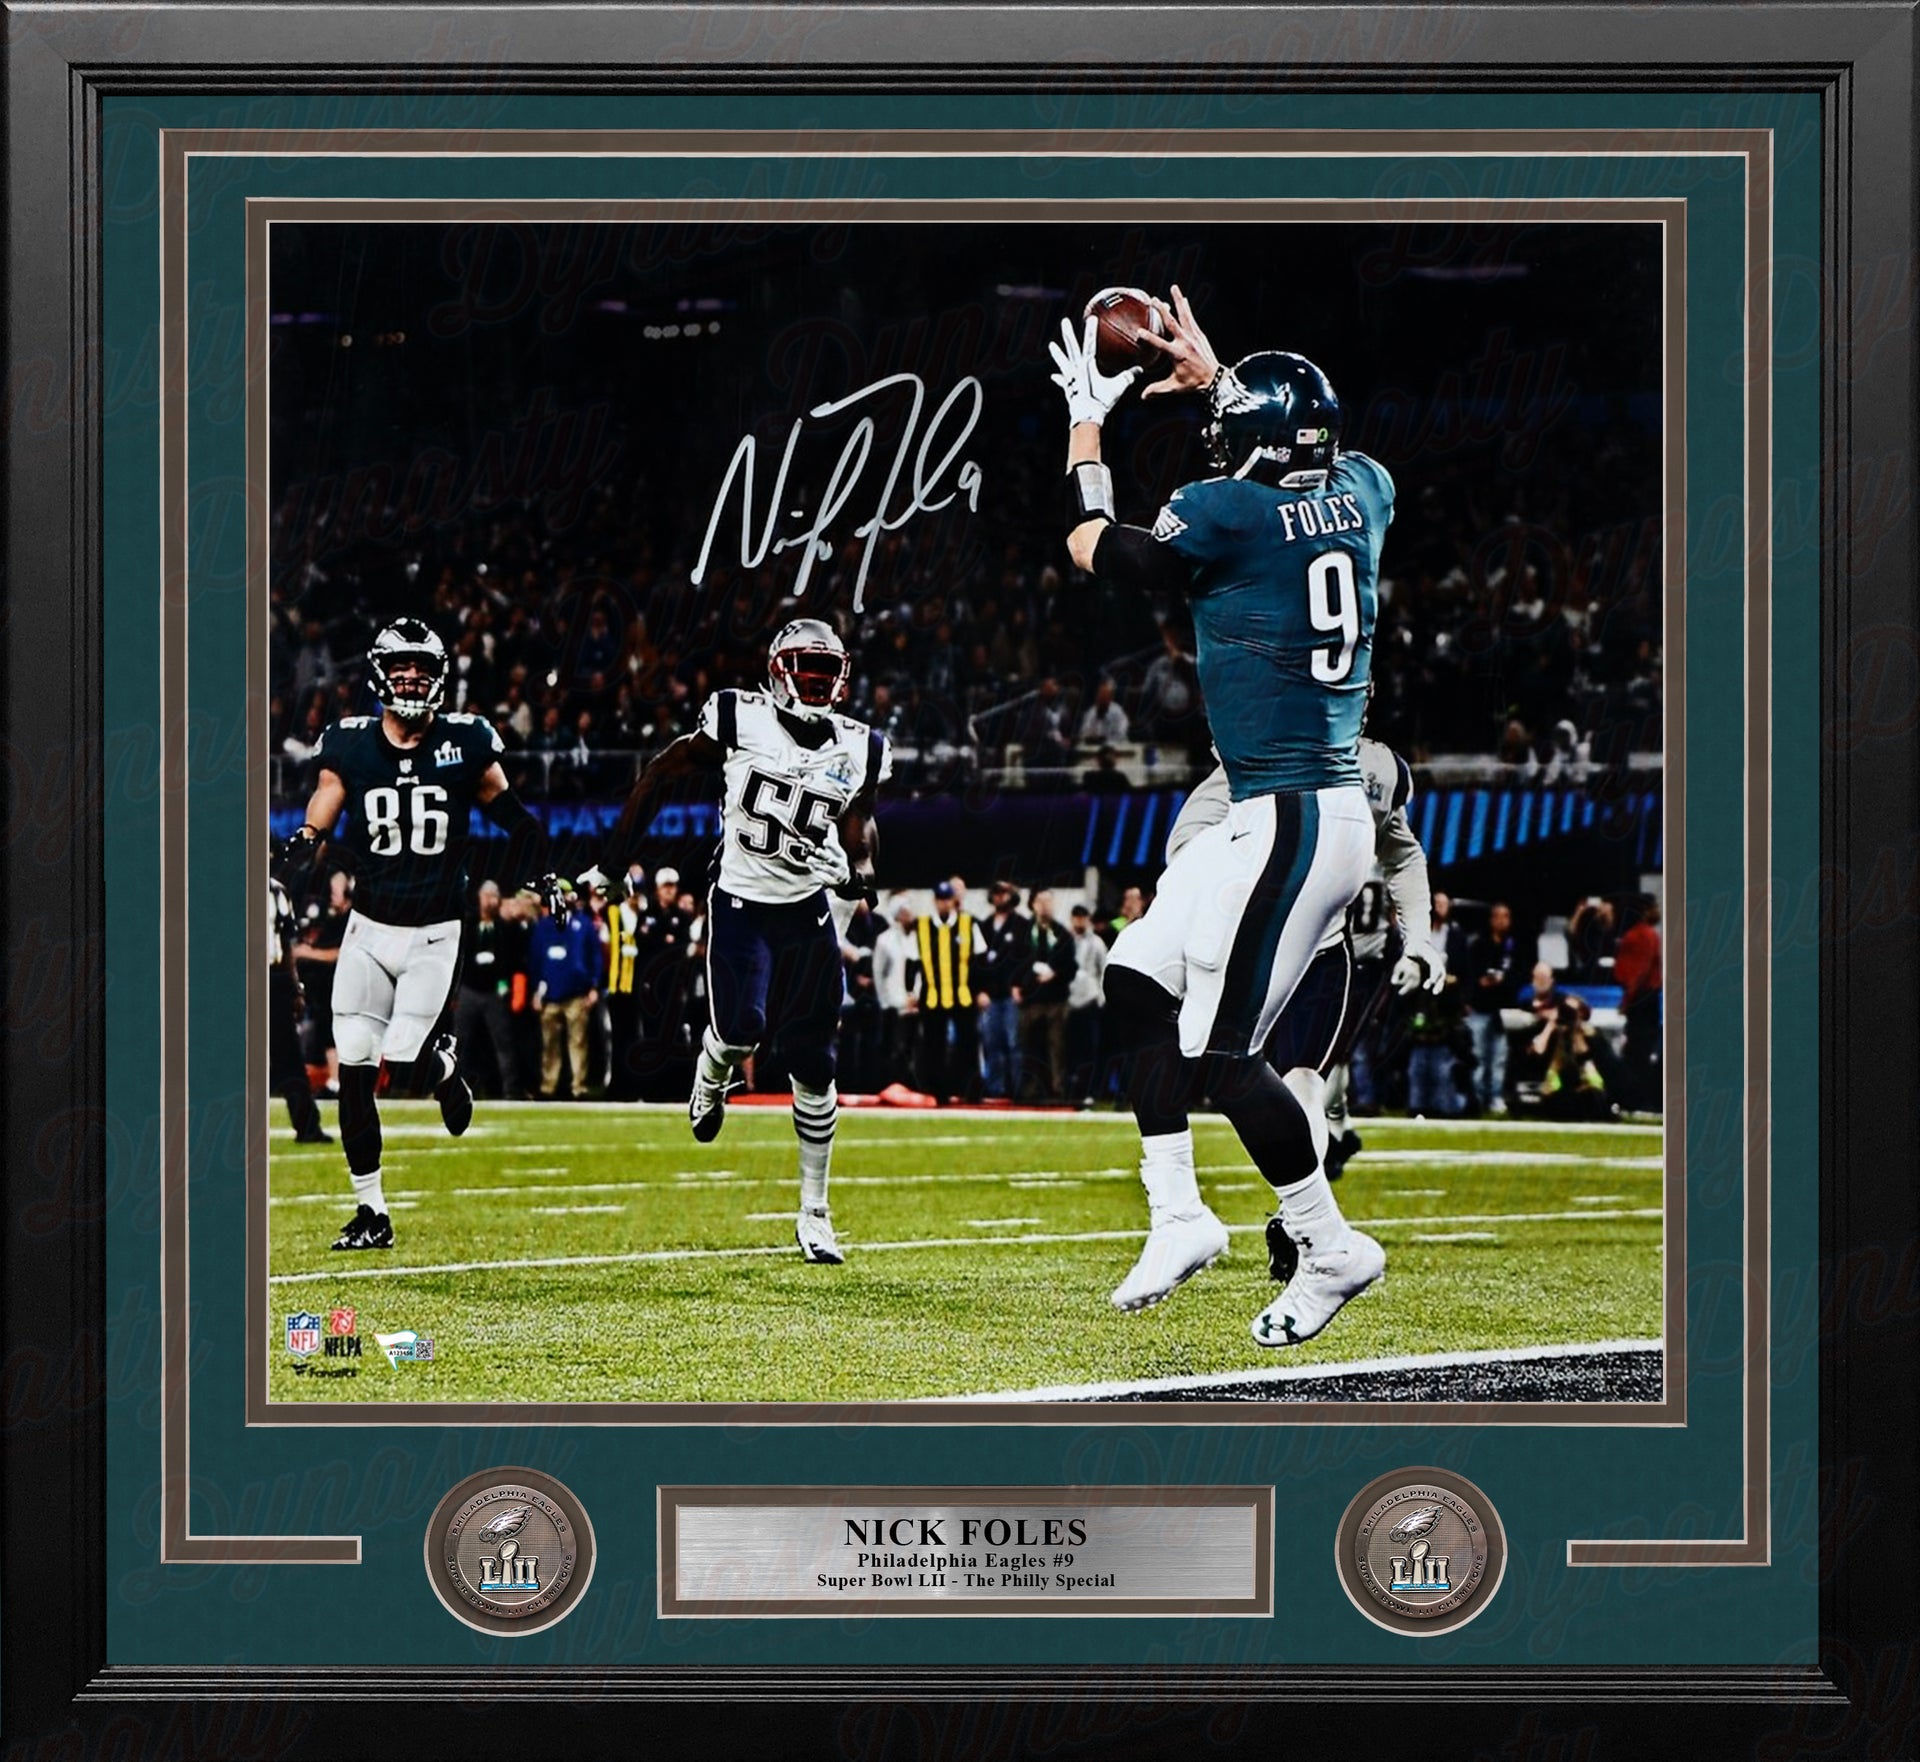 Nick Foles Philadelphia Eagles Super Bowl LII Philly Special Autographed 16x20 Framed Football Photo - Dynasty Sports & Framing 